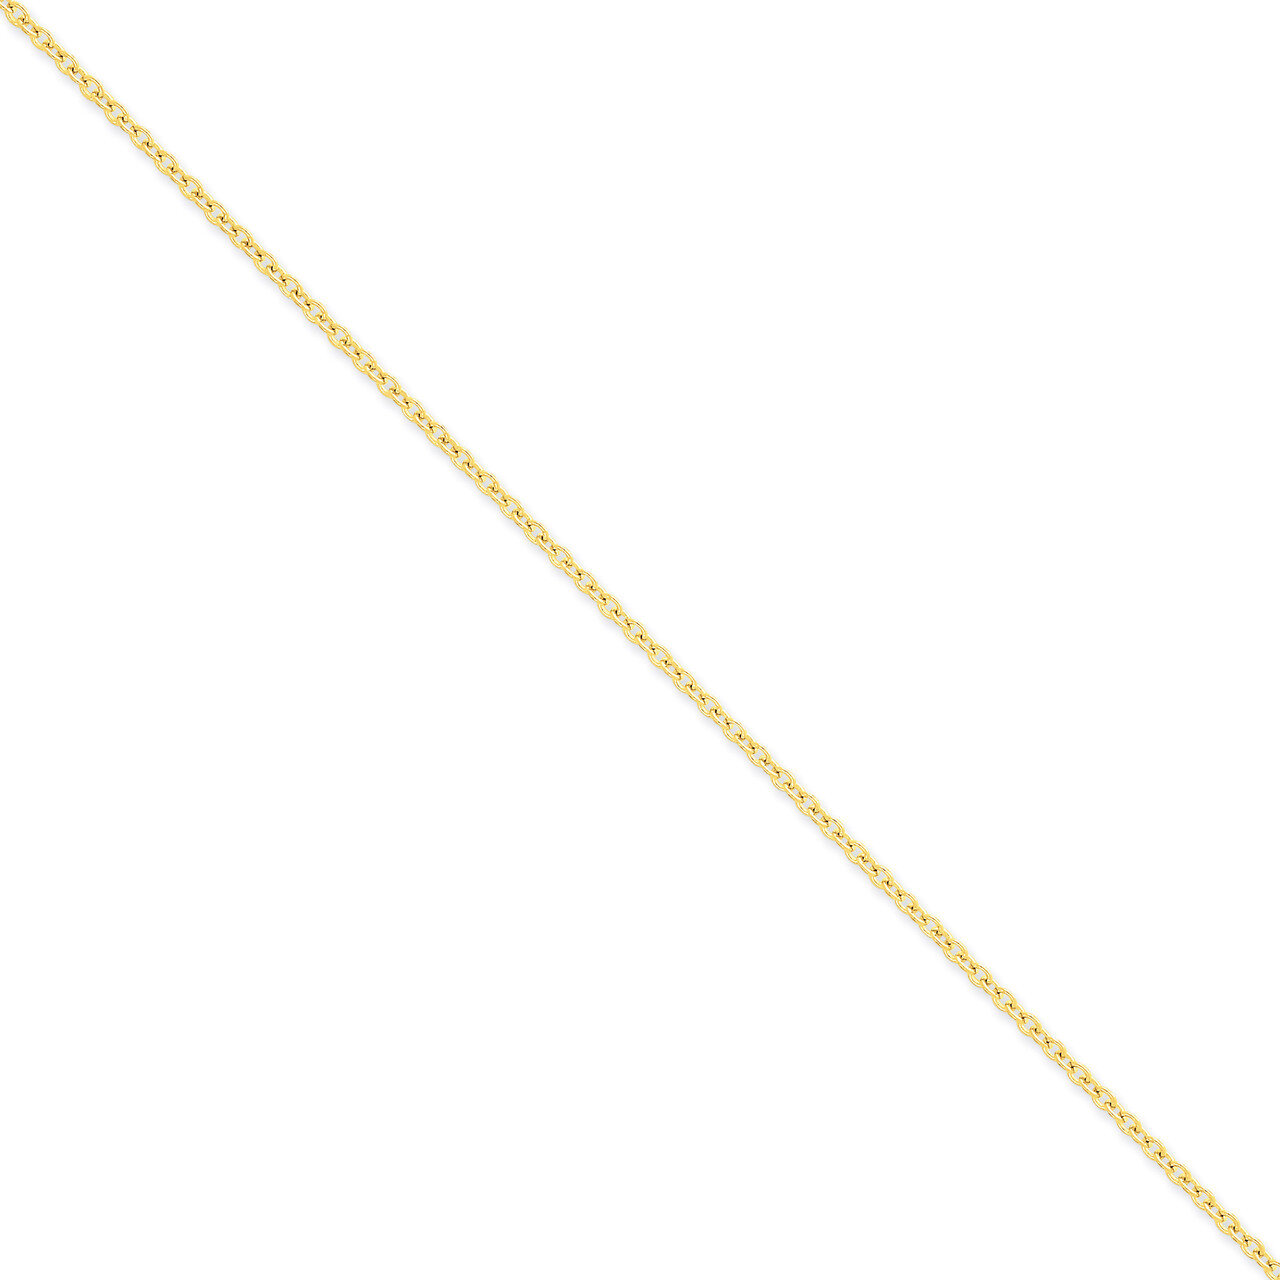 2.4mm Cable Chain 20 Inch 14k Gold PEN217-20